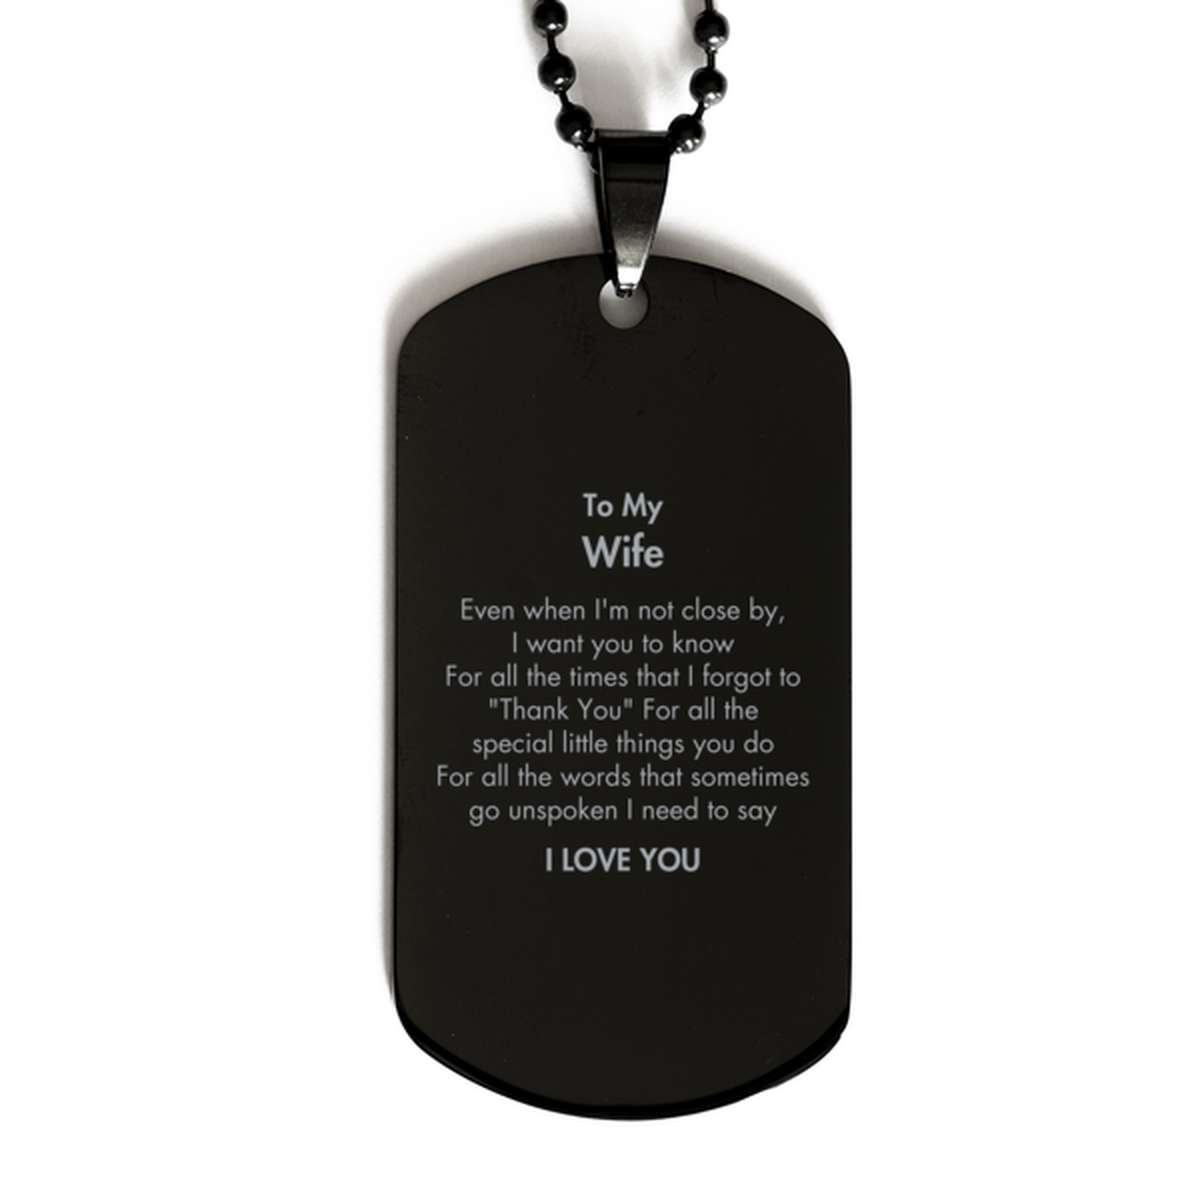 Thank You Gifts for Wife, Keepsake Black Dog Tag Gifts for Wife Birthday Mother's day Father's Day Wife For all the words That sometimes go unspoken I need to say I LOVE YOU